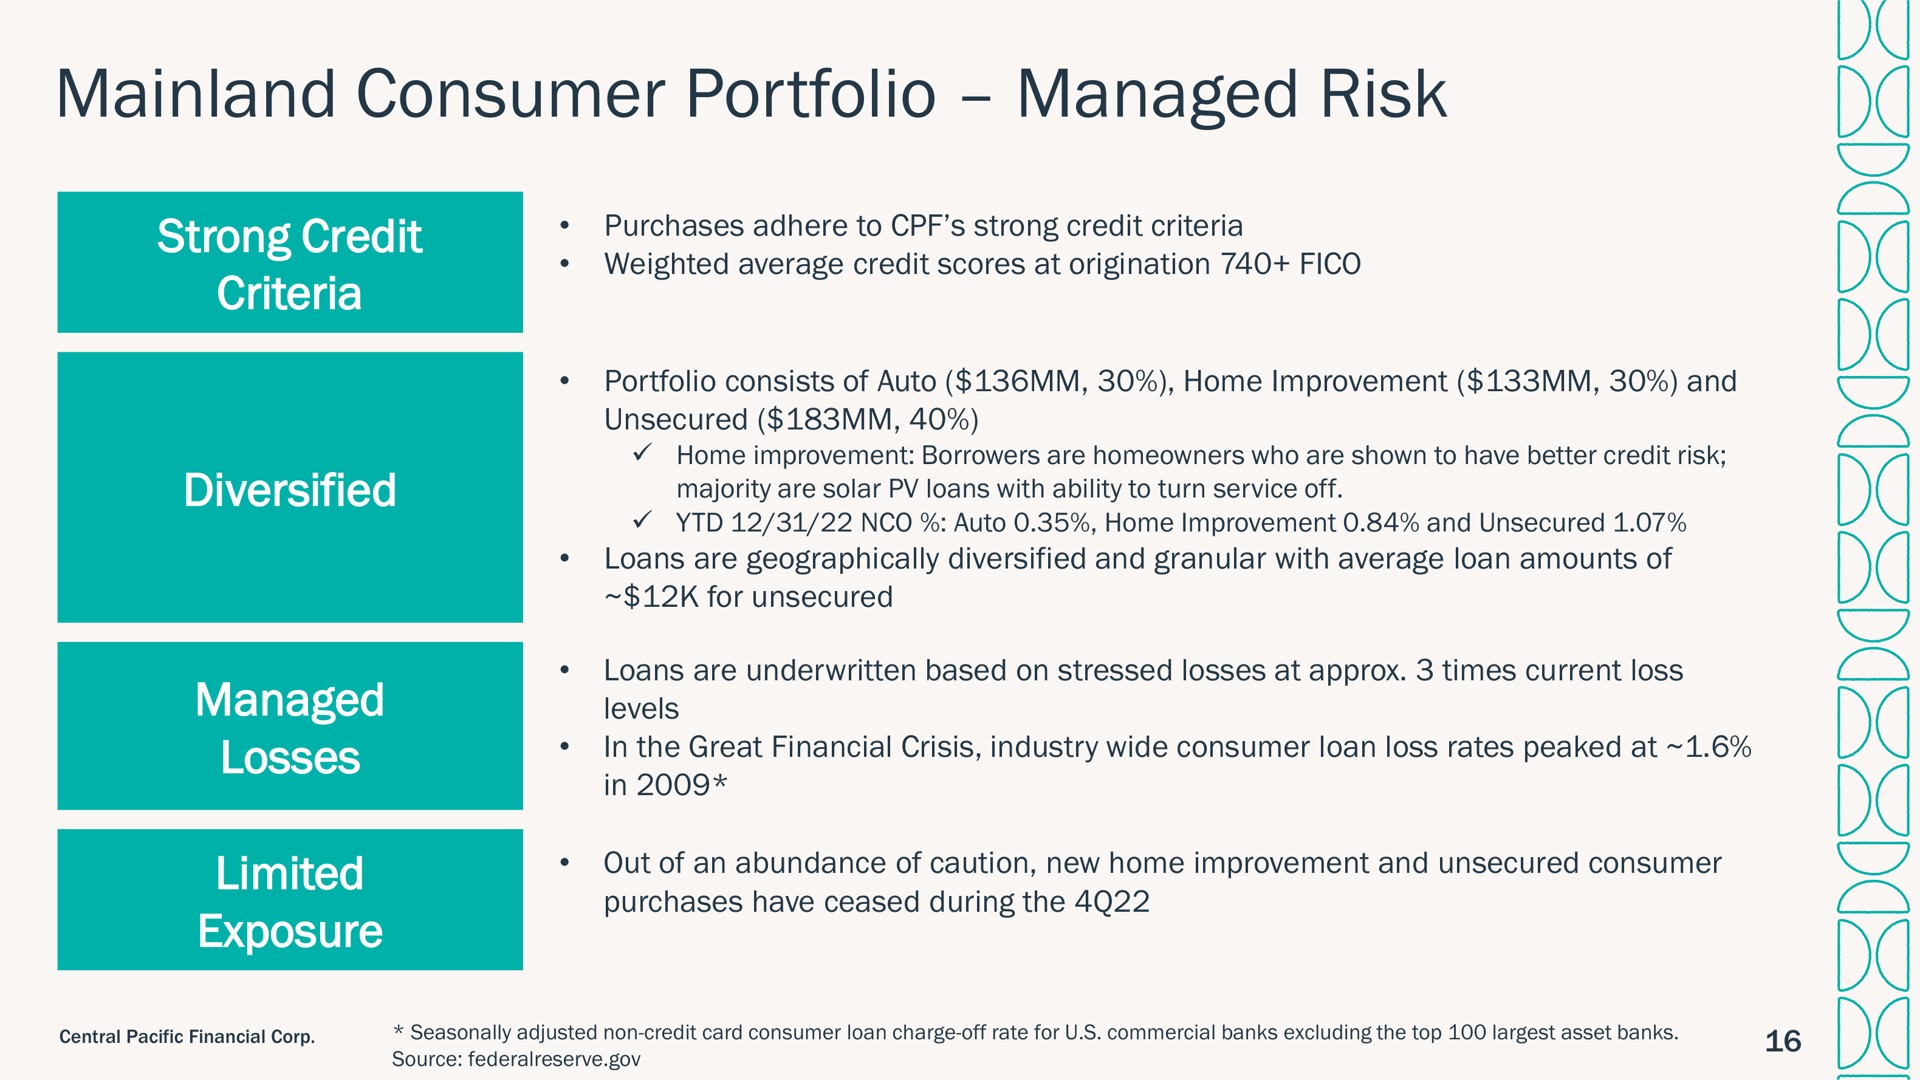 consumer portfolio managed risk strong credit criteria diversified managed losses limited exposure | Central Pacific Financial